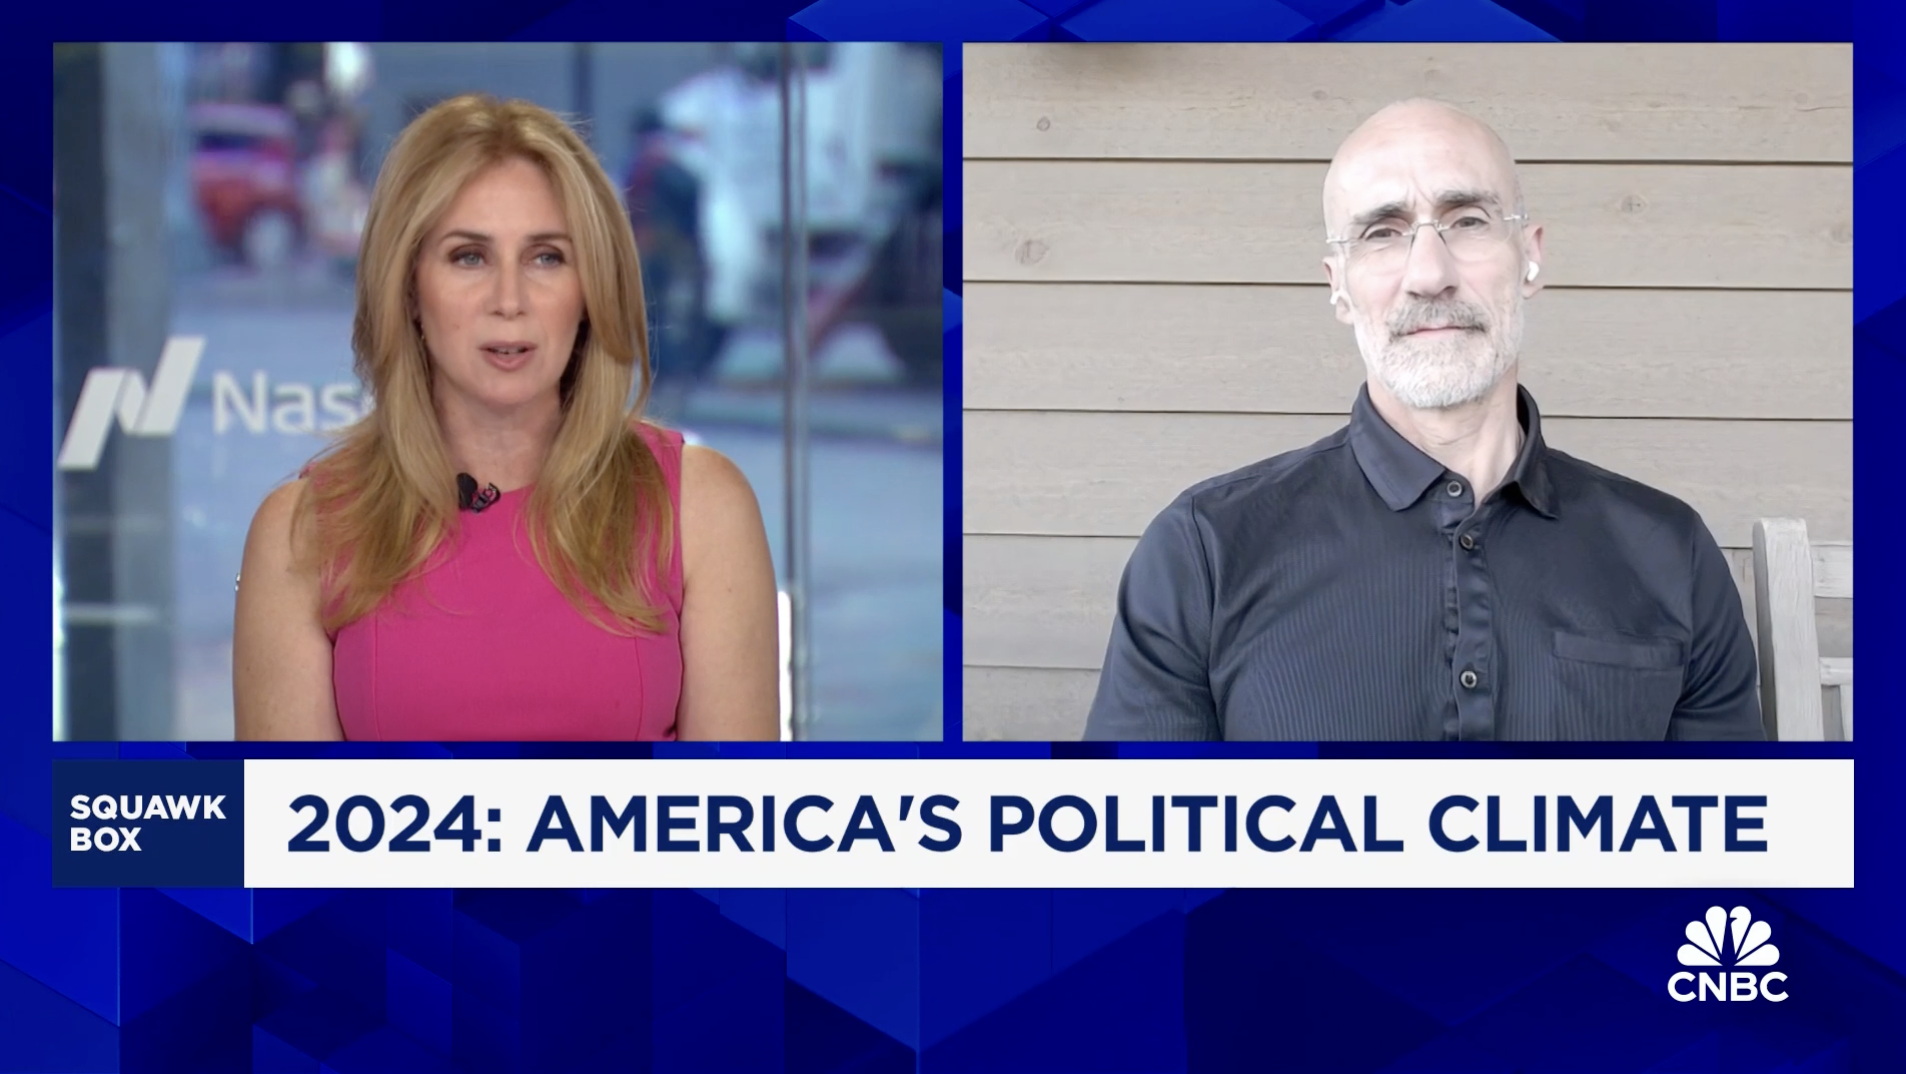 Squawk Box: The strength of our country is in our unity, says Harvard’s Arthur Brooks